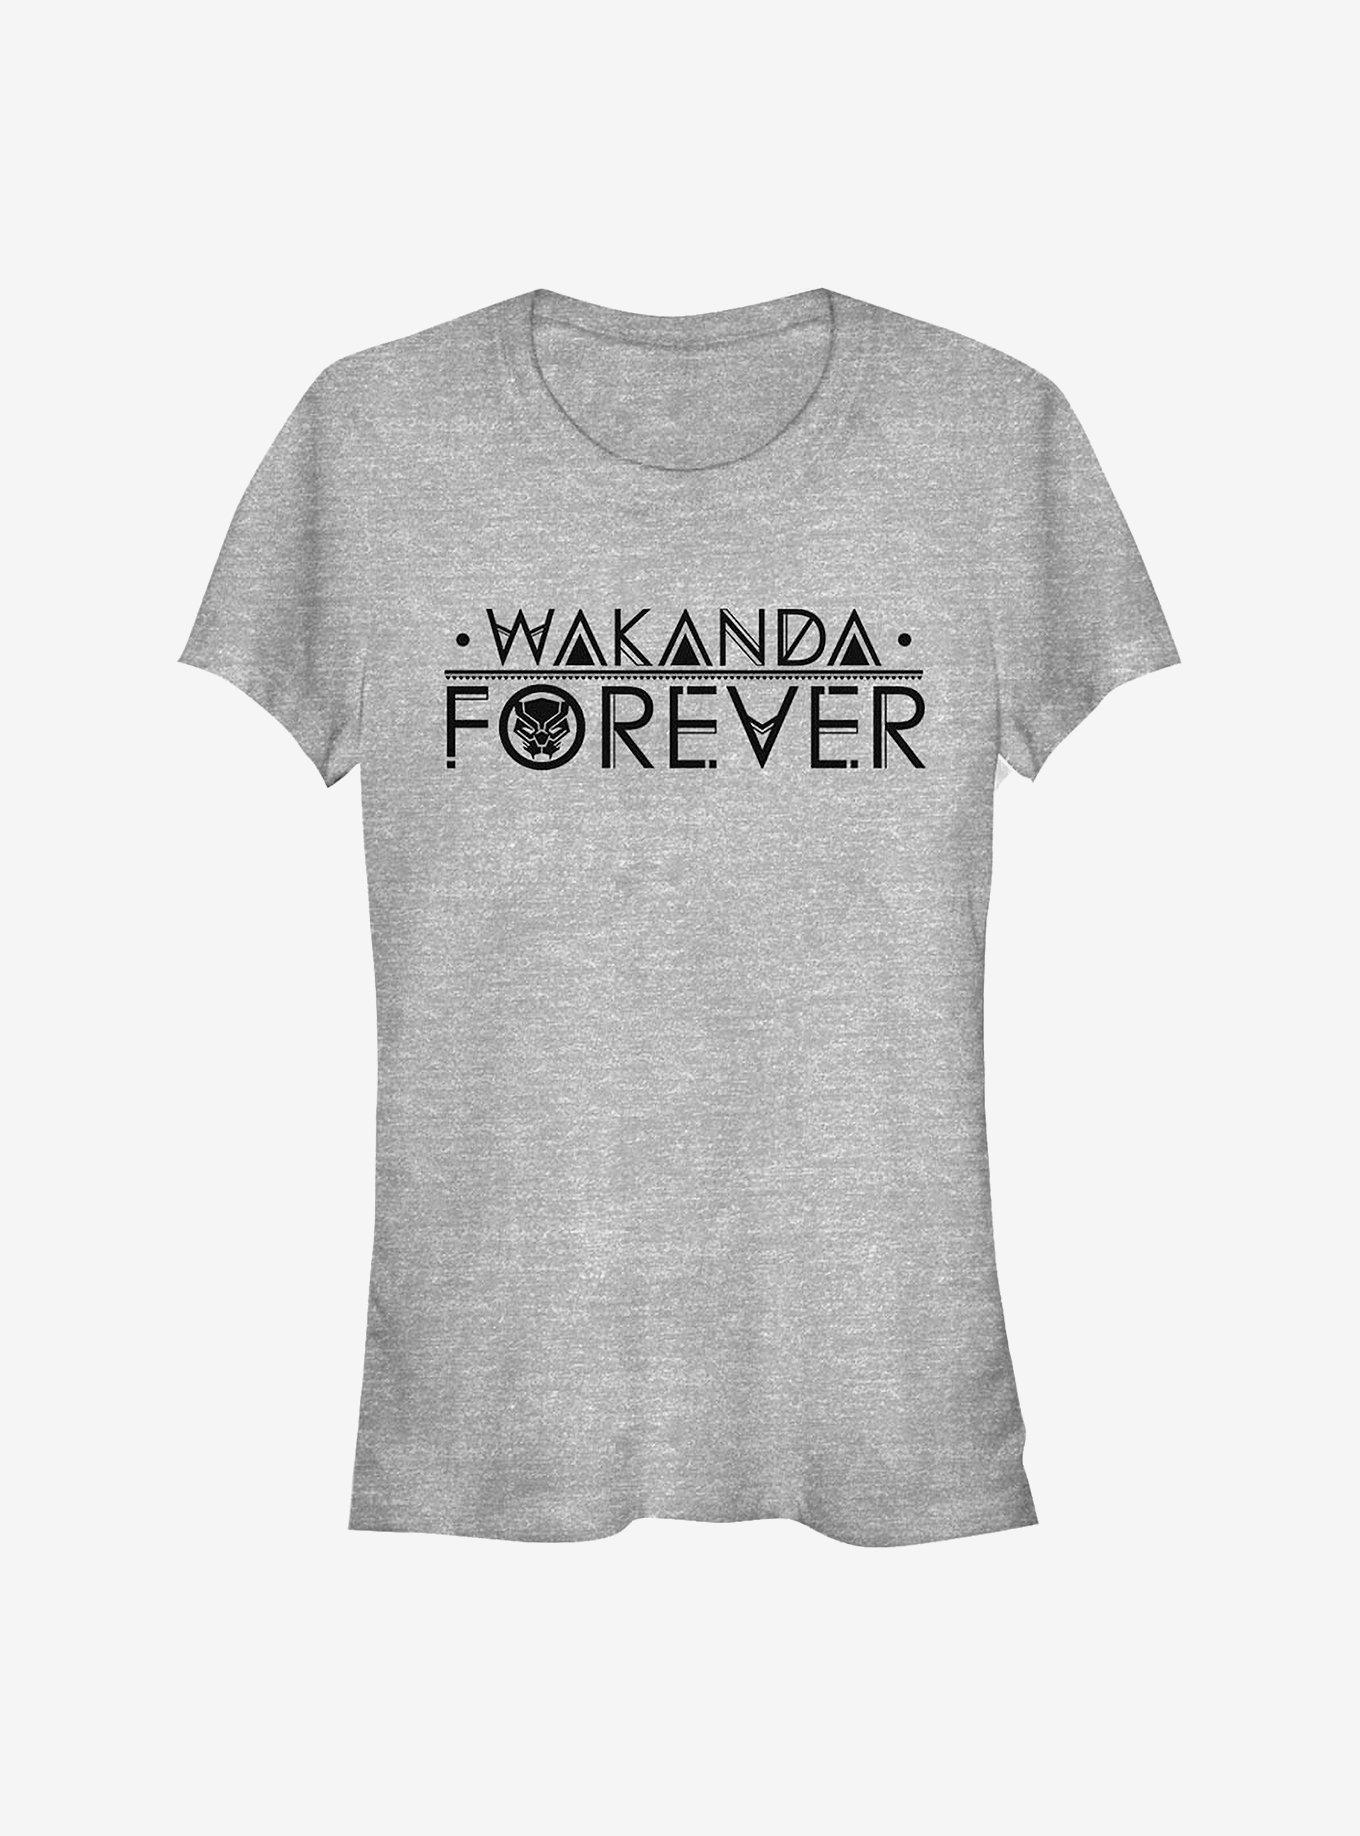 Marvel Black Panther Wakanda Forever Text Girls T-Shirt, ATH HTR, hi-res